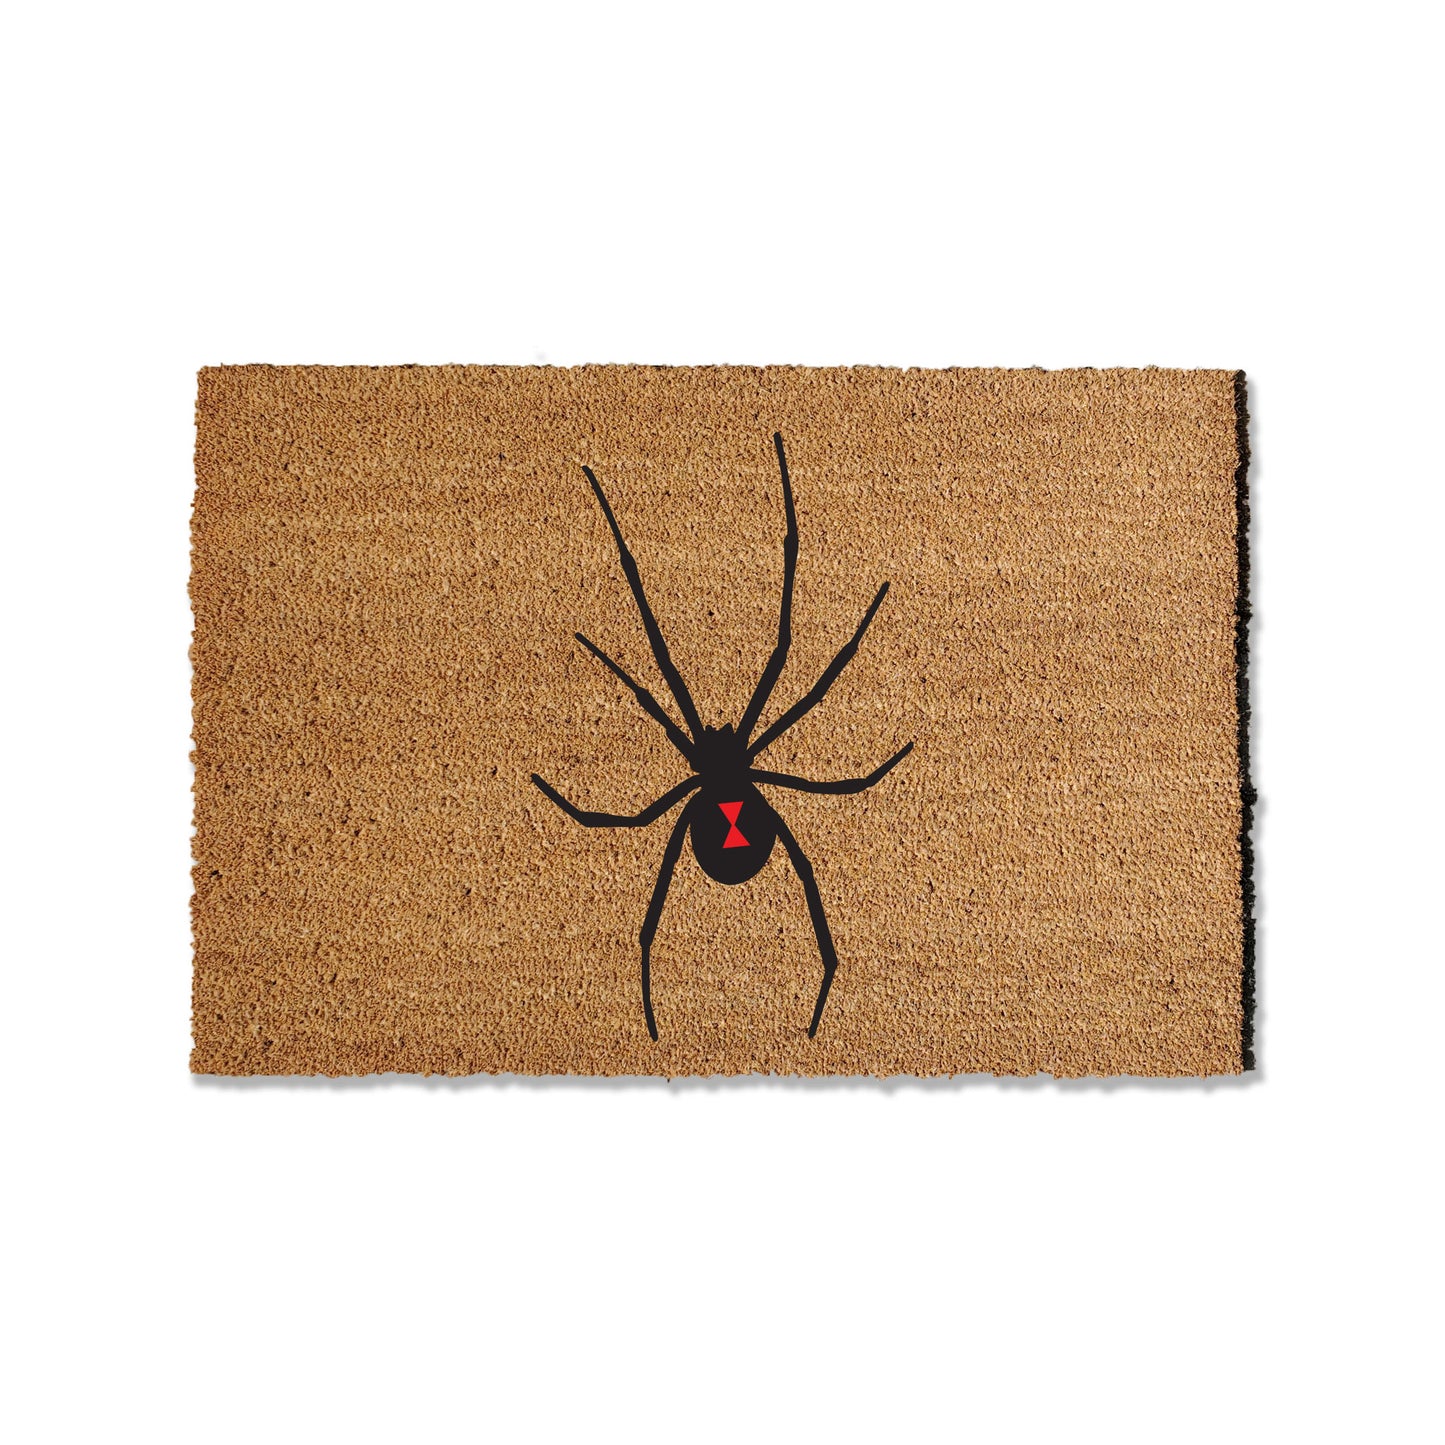 1/2 inch thick coir doormat featuring a black widow spider design, adding a touch of intrigue to your entryway. Highly effective at trapping dirt, this mat combines functionality with a unique and eye-catching aesthetic to elevate your doorstep.